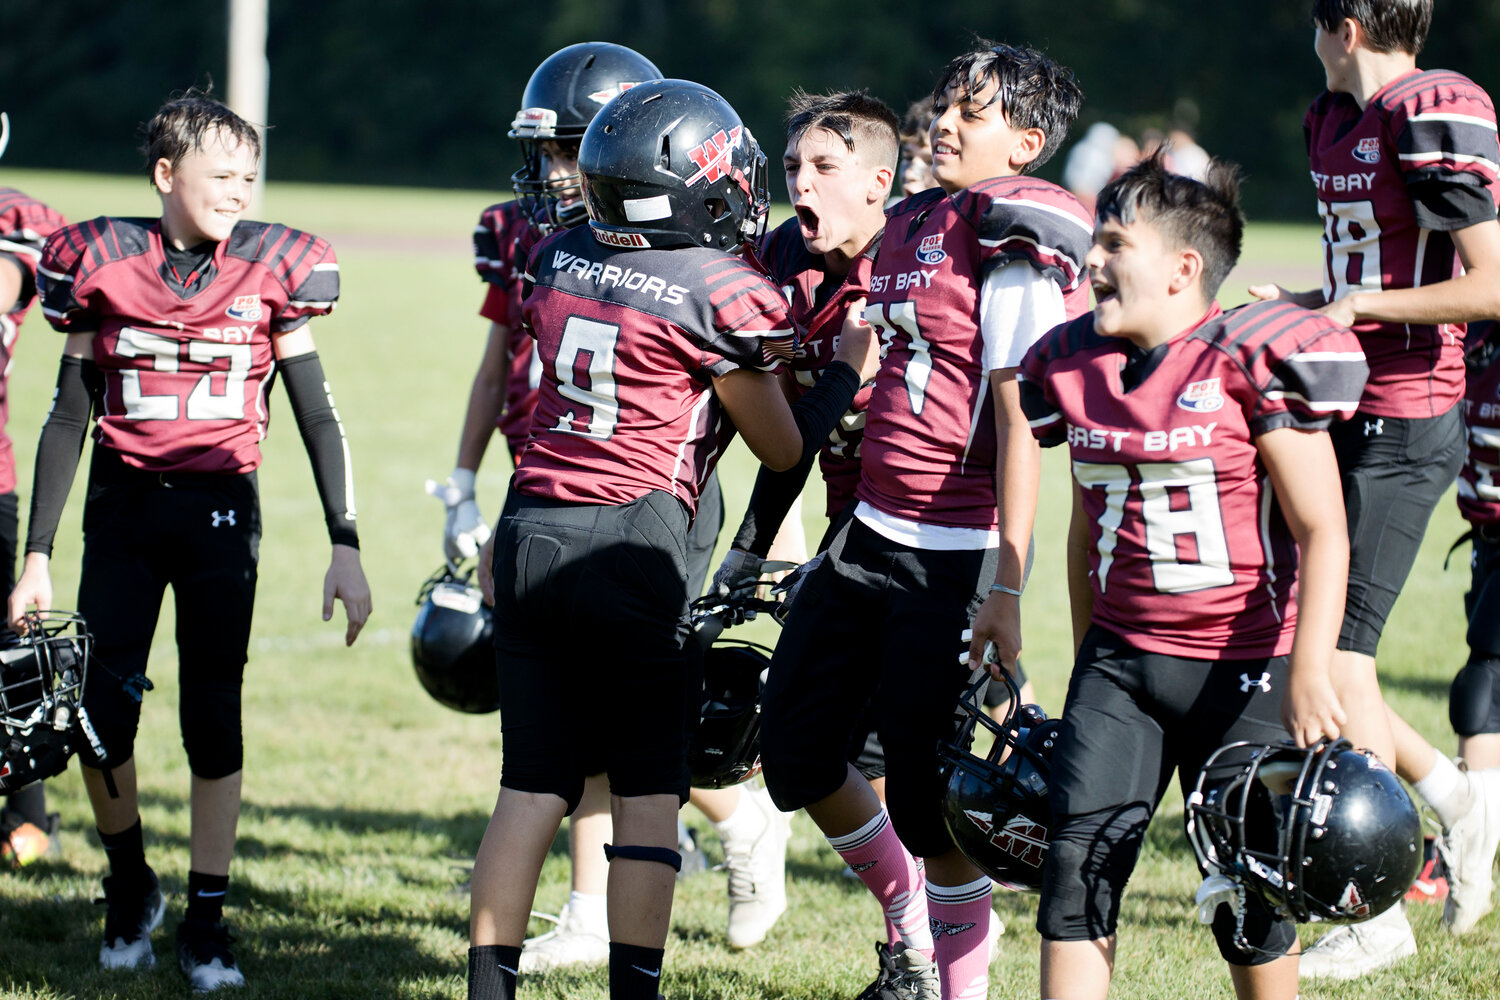 12U celebrates their first win of the season after beating Portsmouth White 38-13, Sunday. 